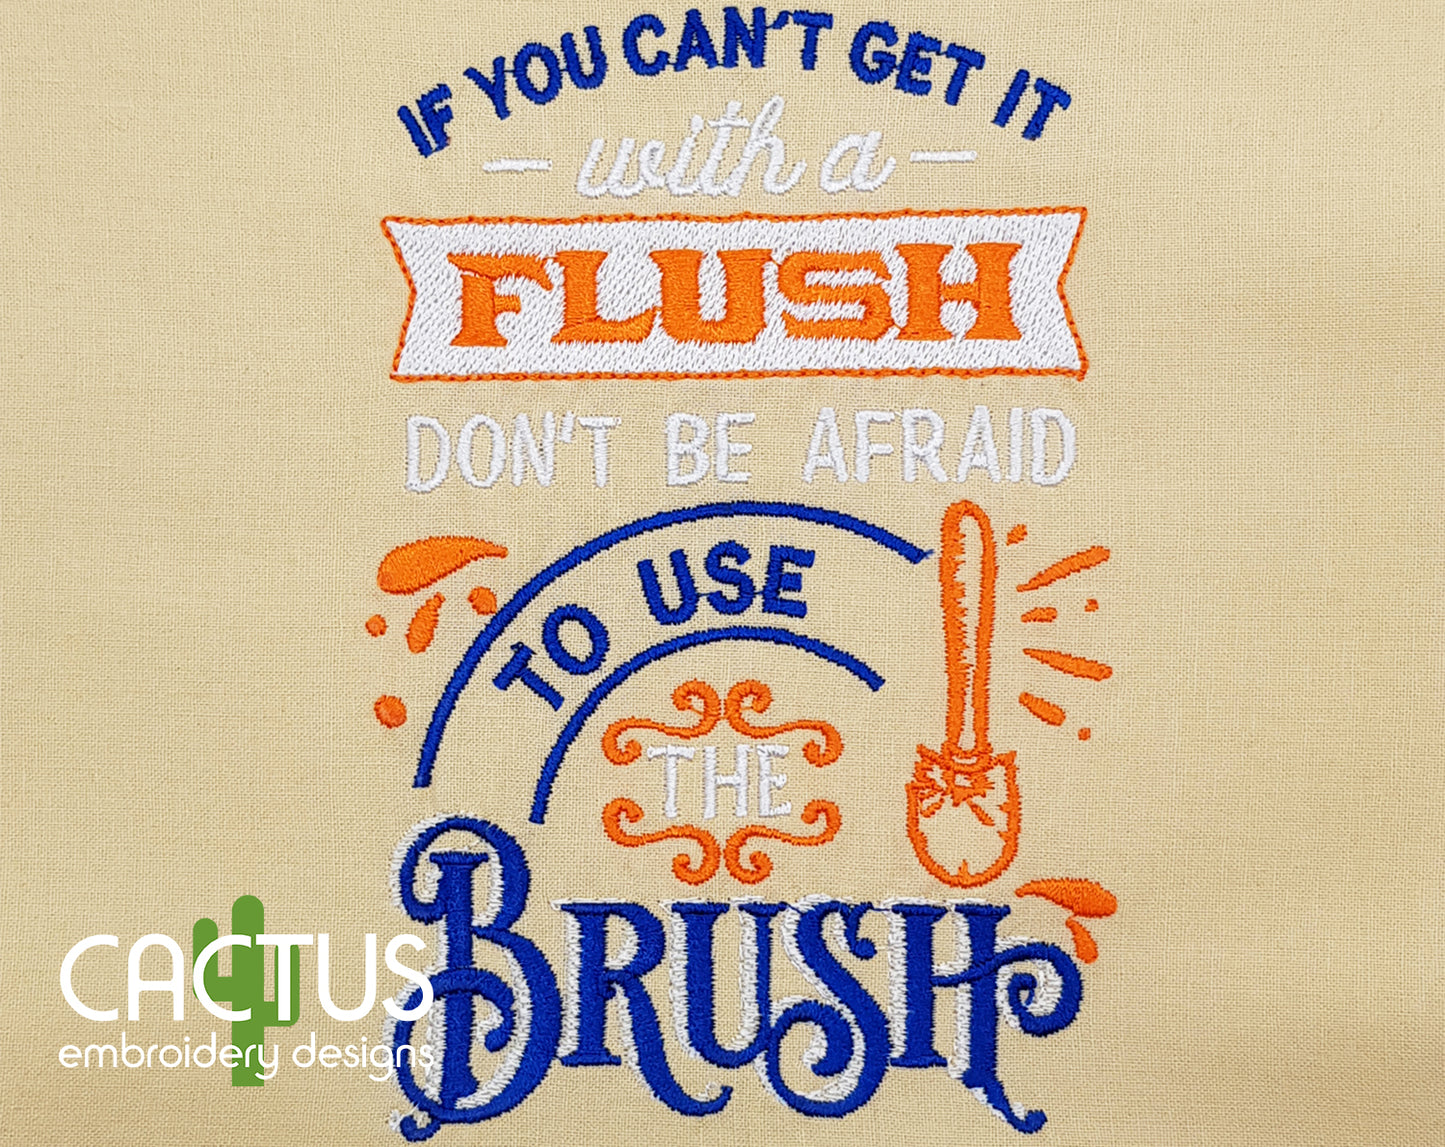 Don't Be Afraid to use the Brush Embroidery Design